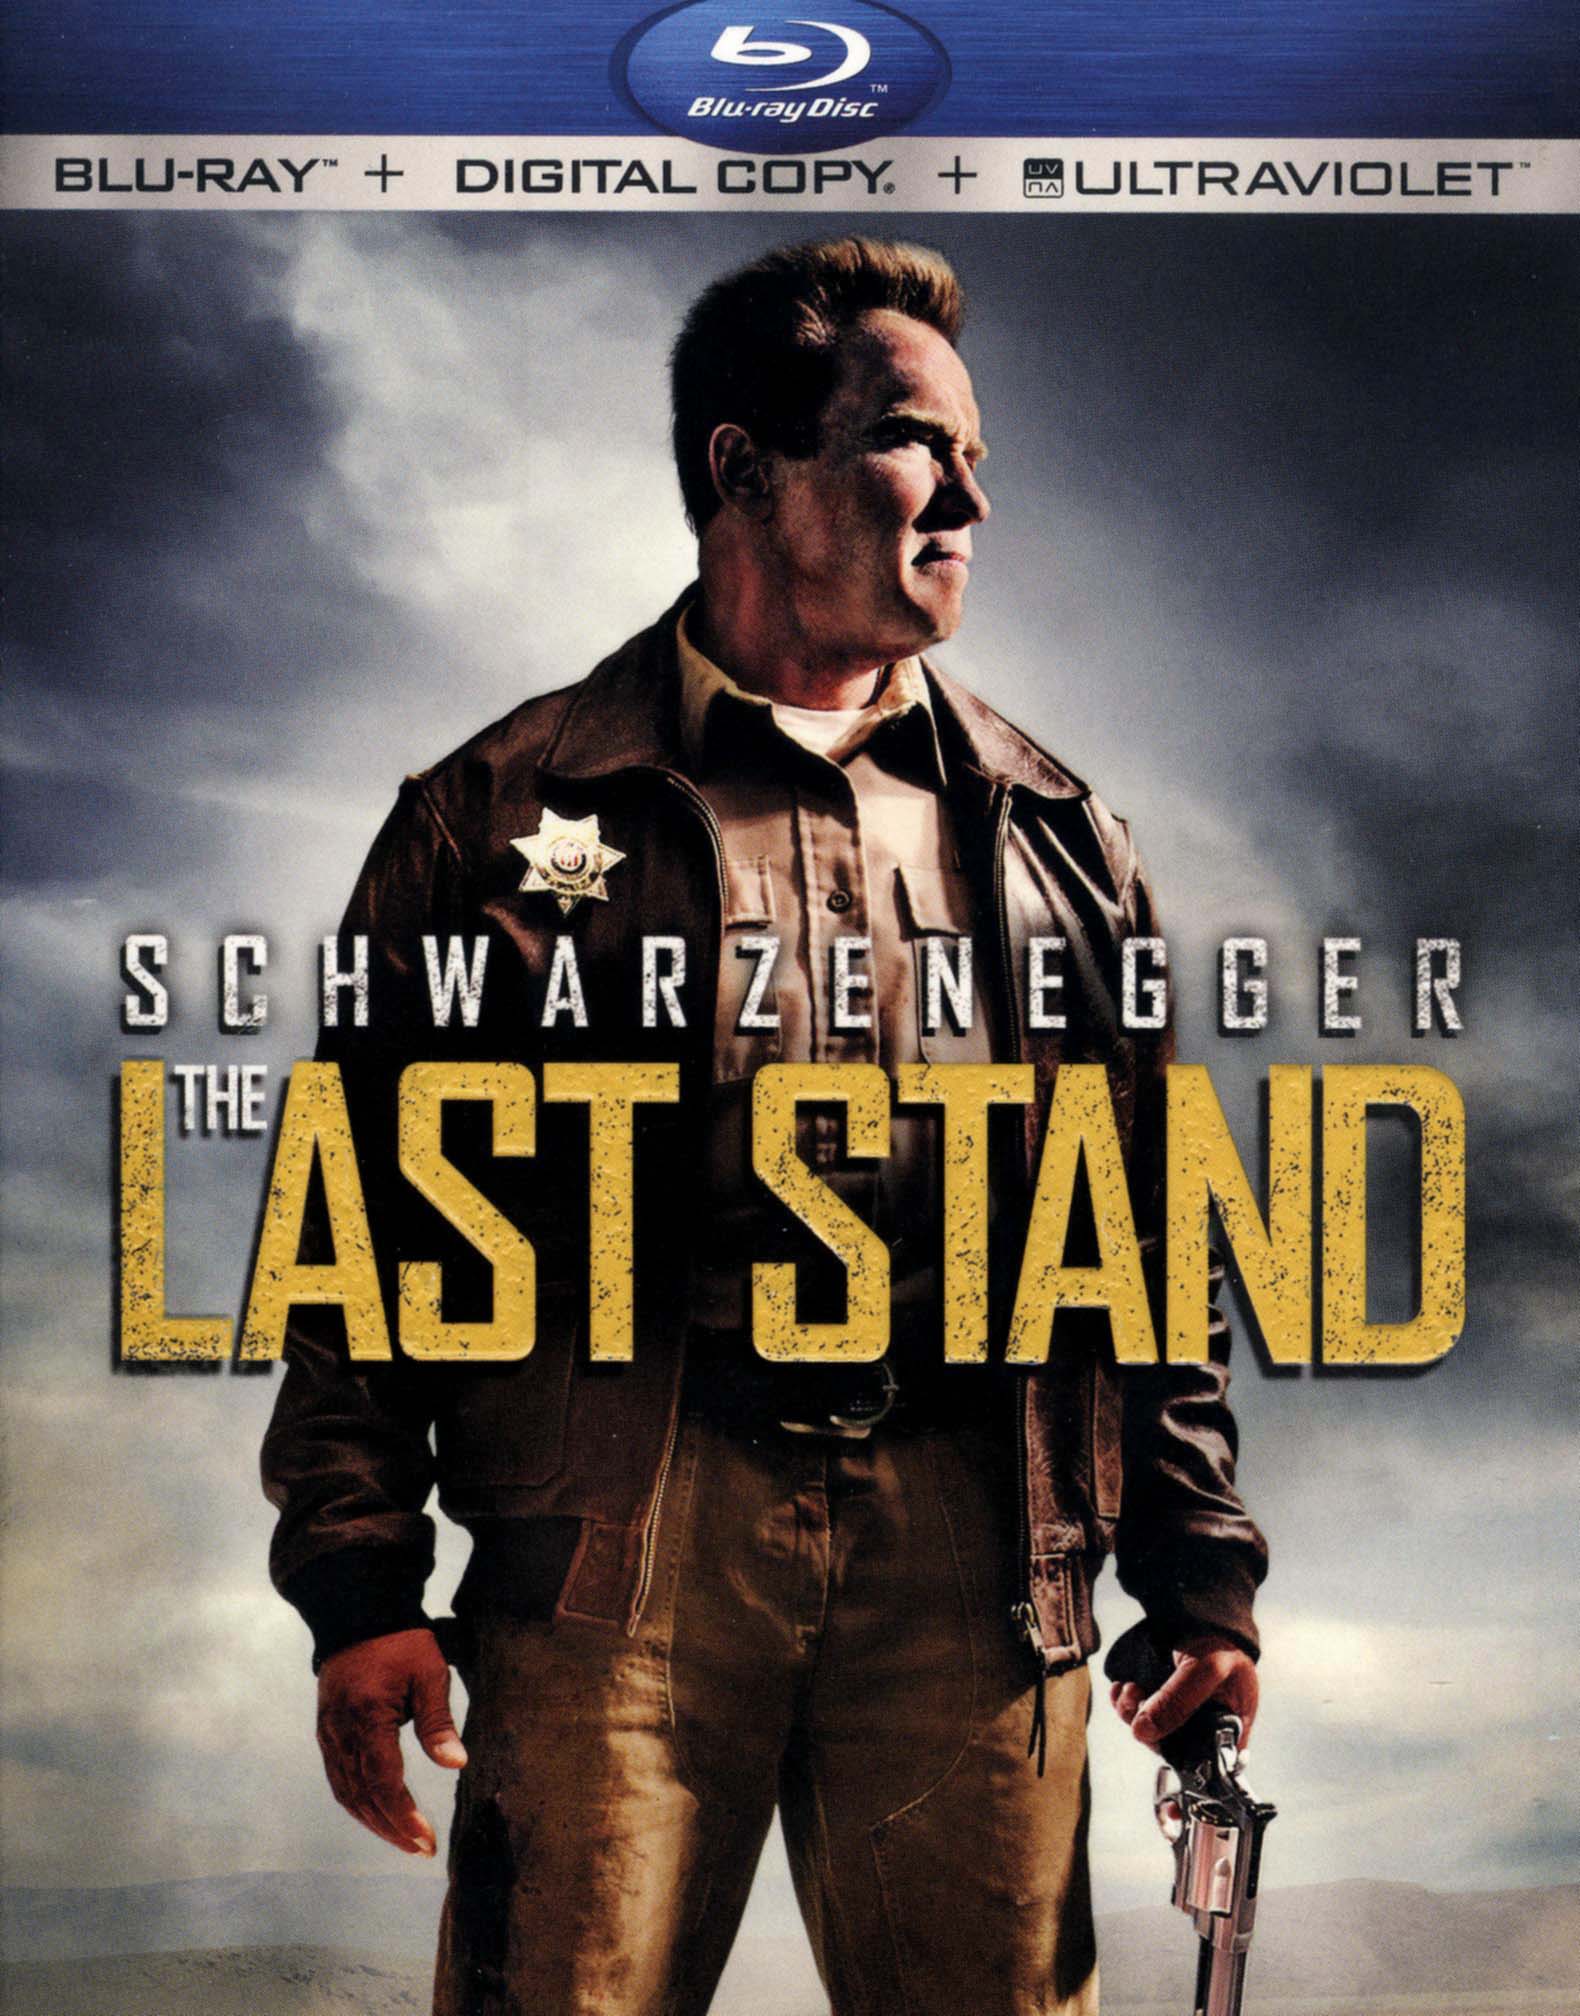 The Last Stand [Blu-ray] [2013] - Best Buy